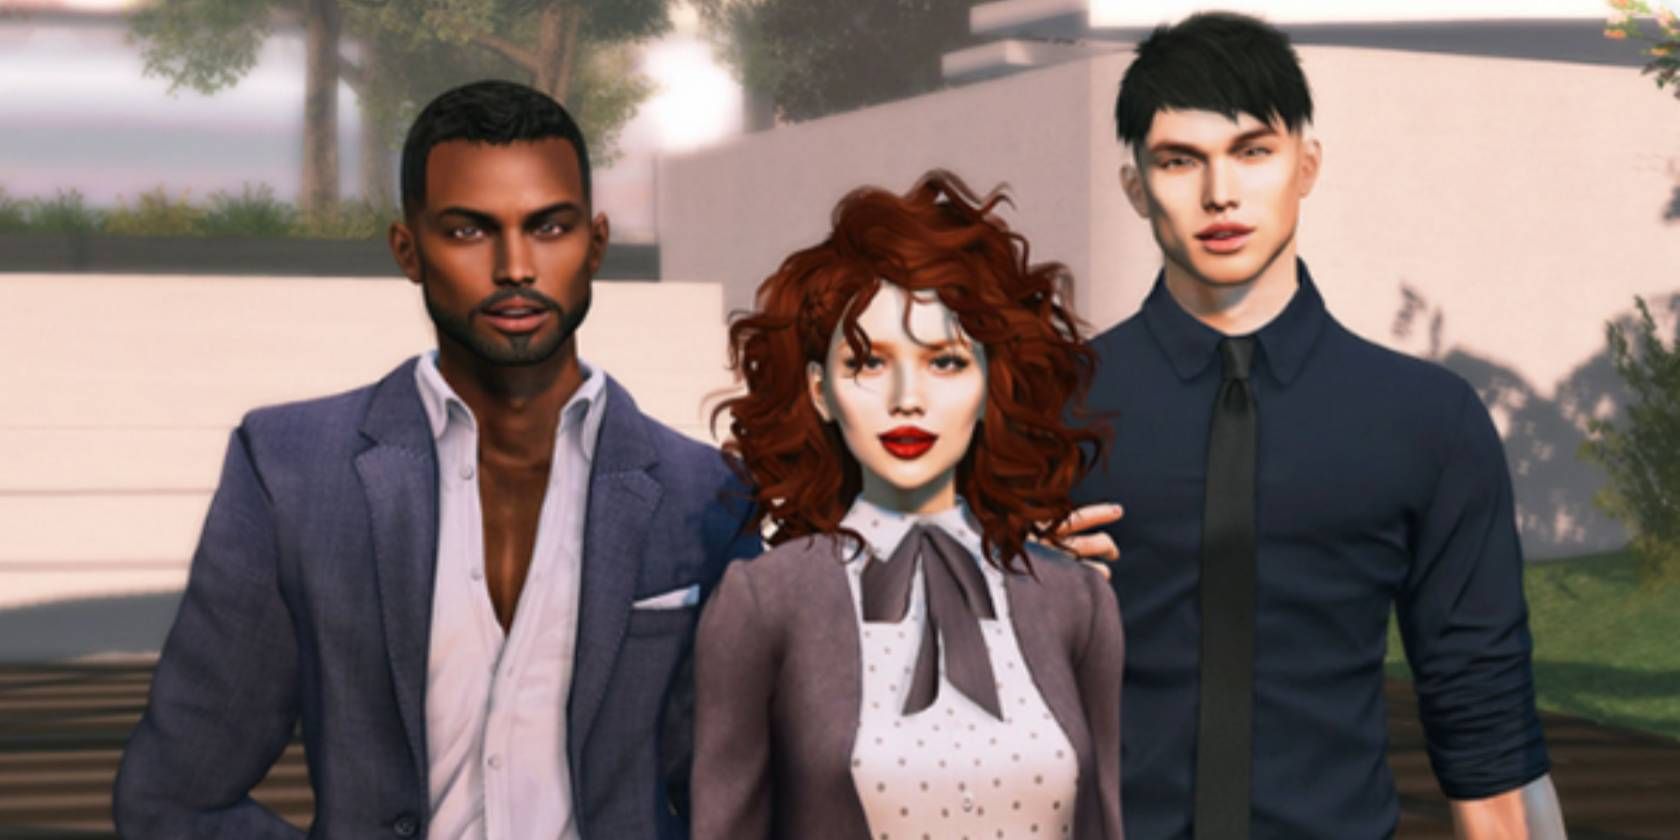 Second life residents